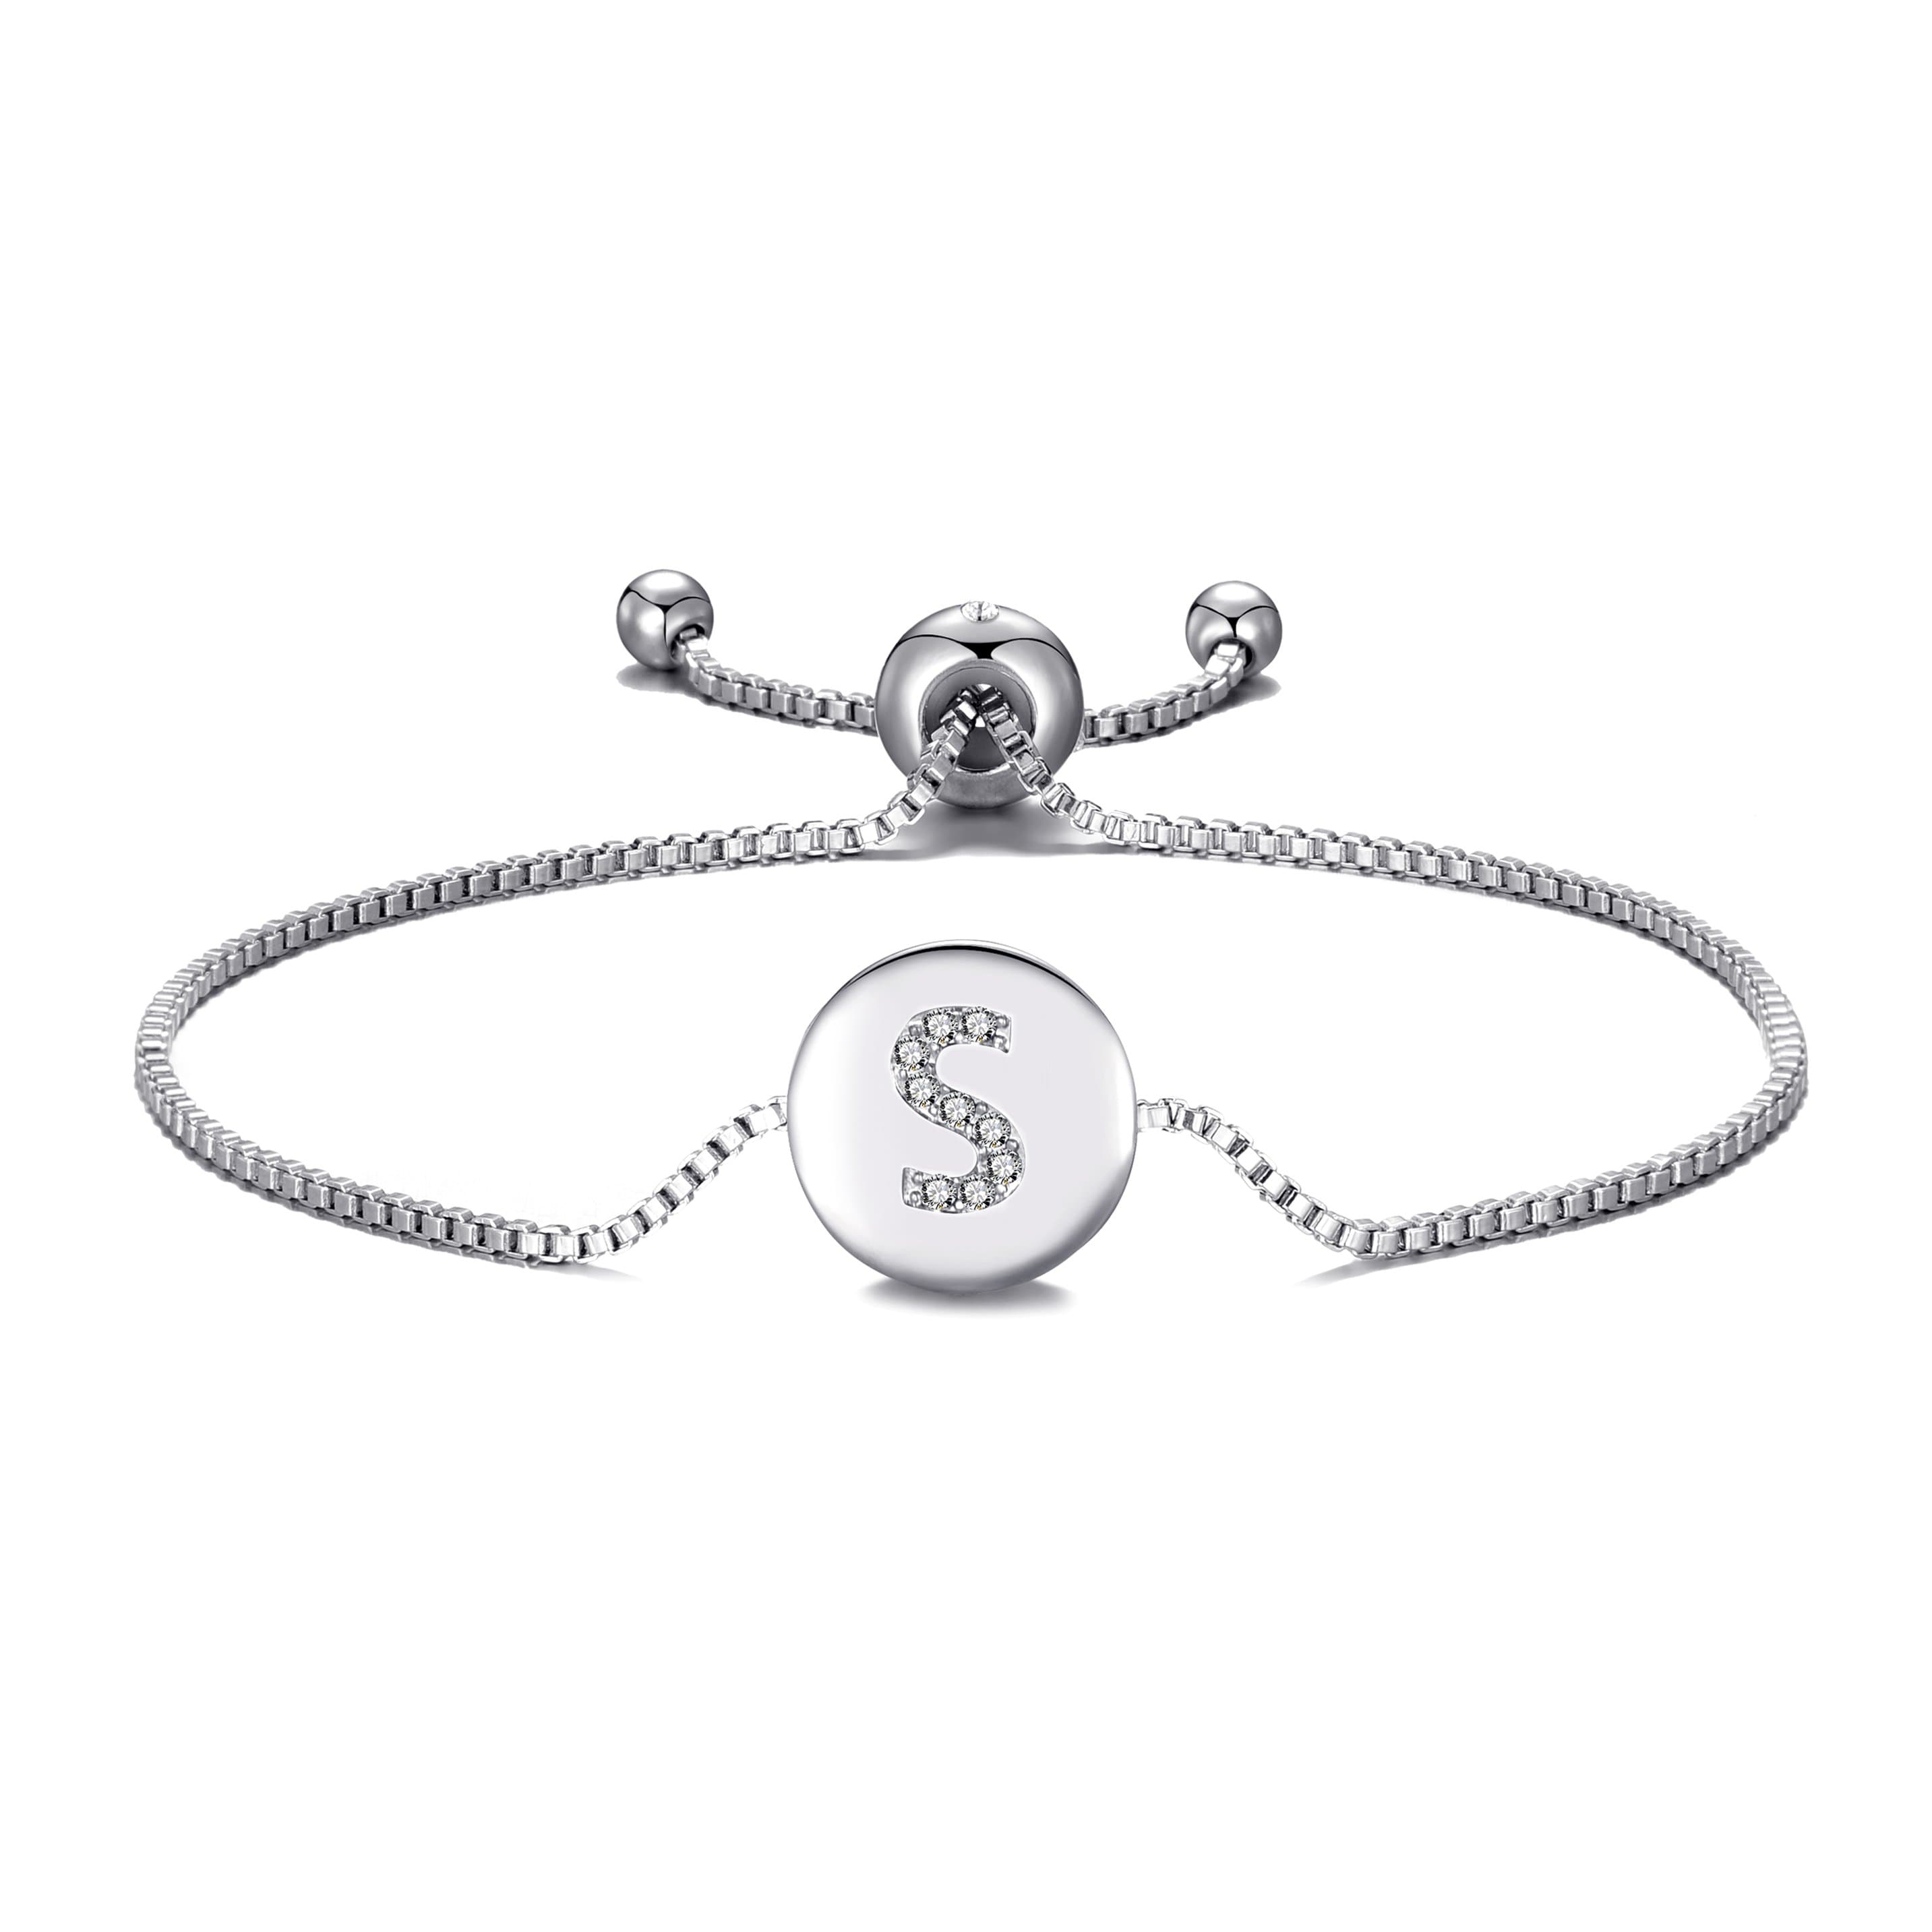 Initial Friendship Bracelet Letter S Created with Zircondia® Crystals by Philip Jones Jewellery